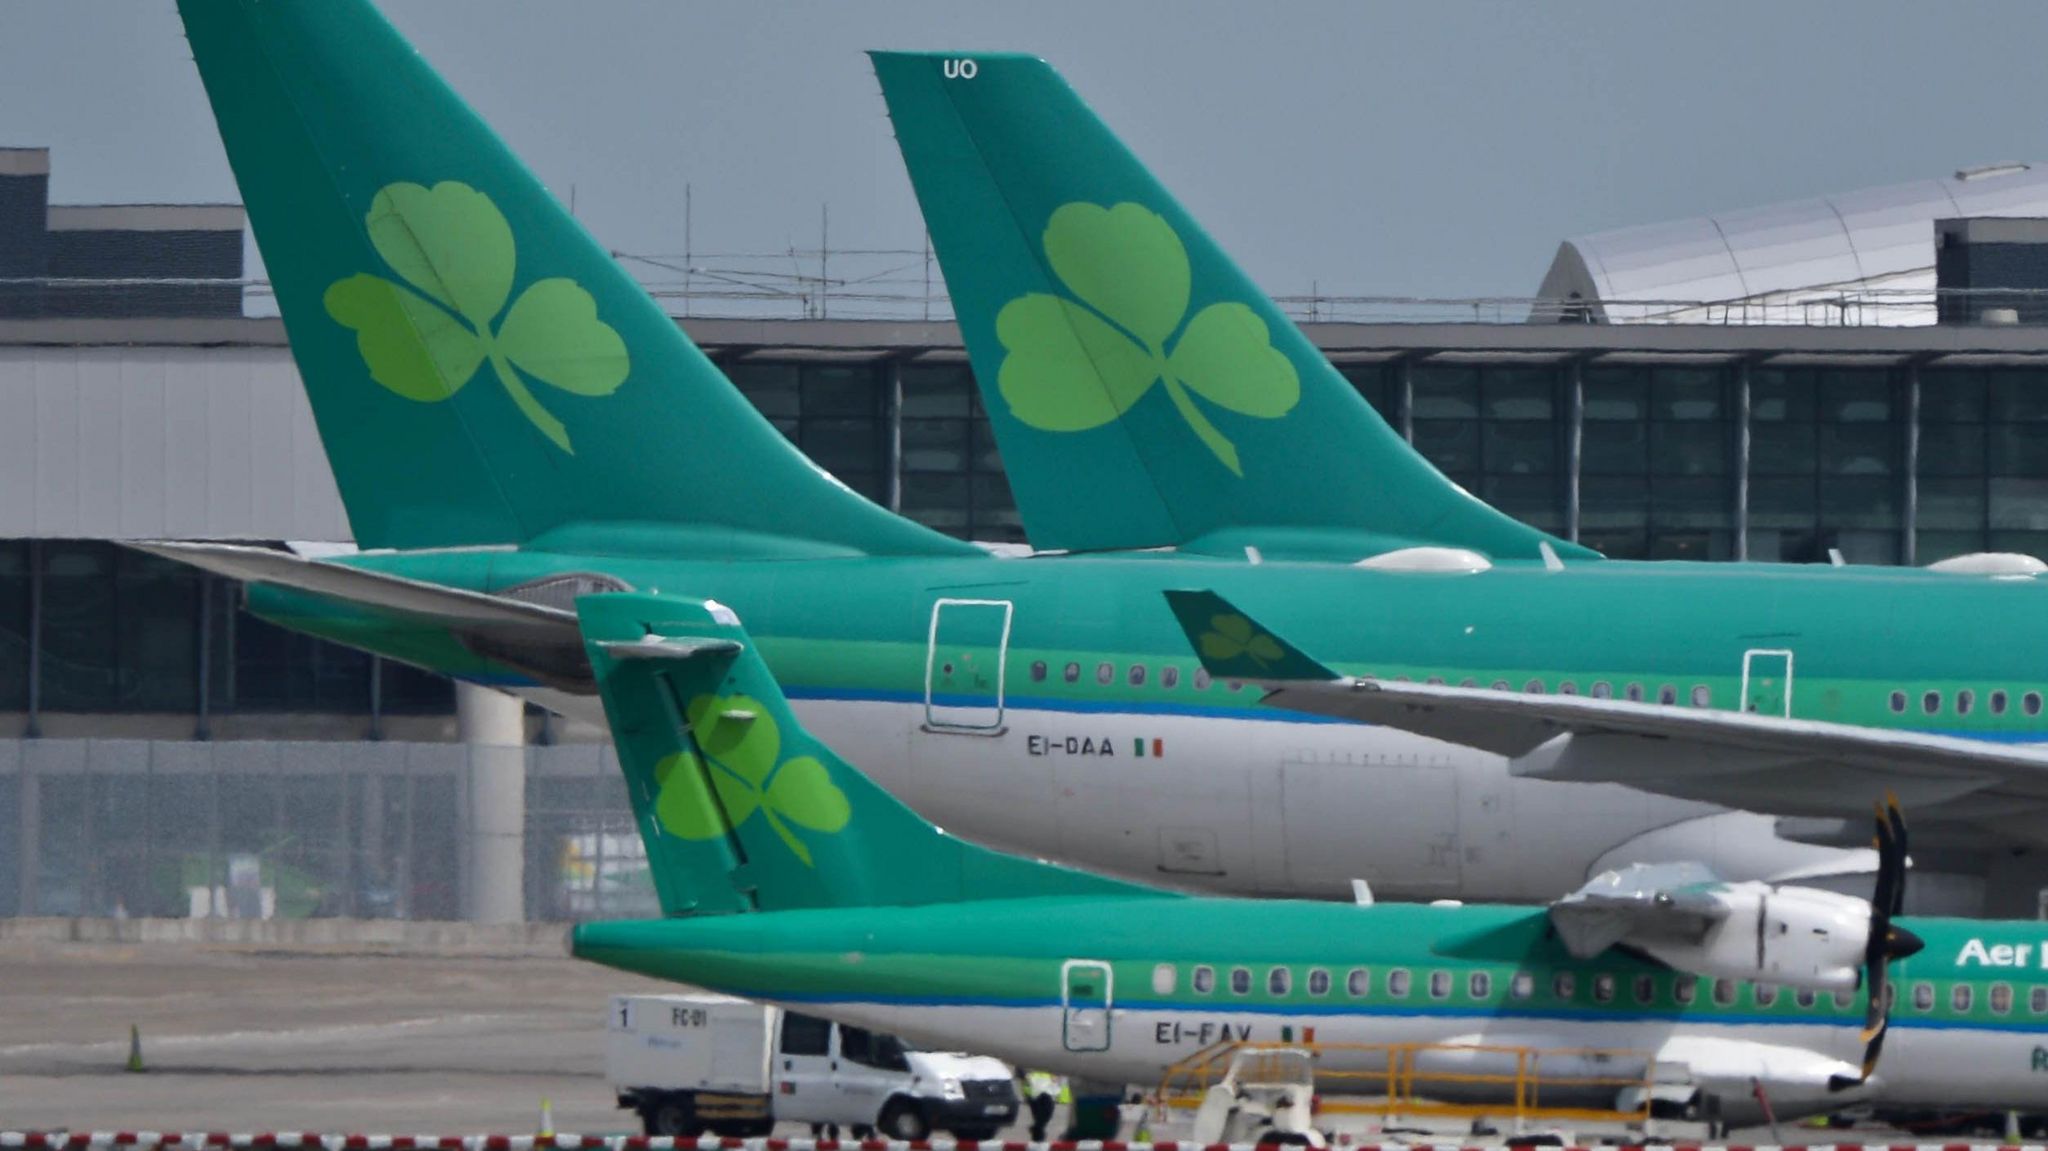 A number of Aer Lingus planes parked on an airport runway